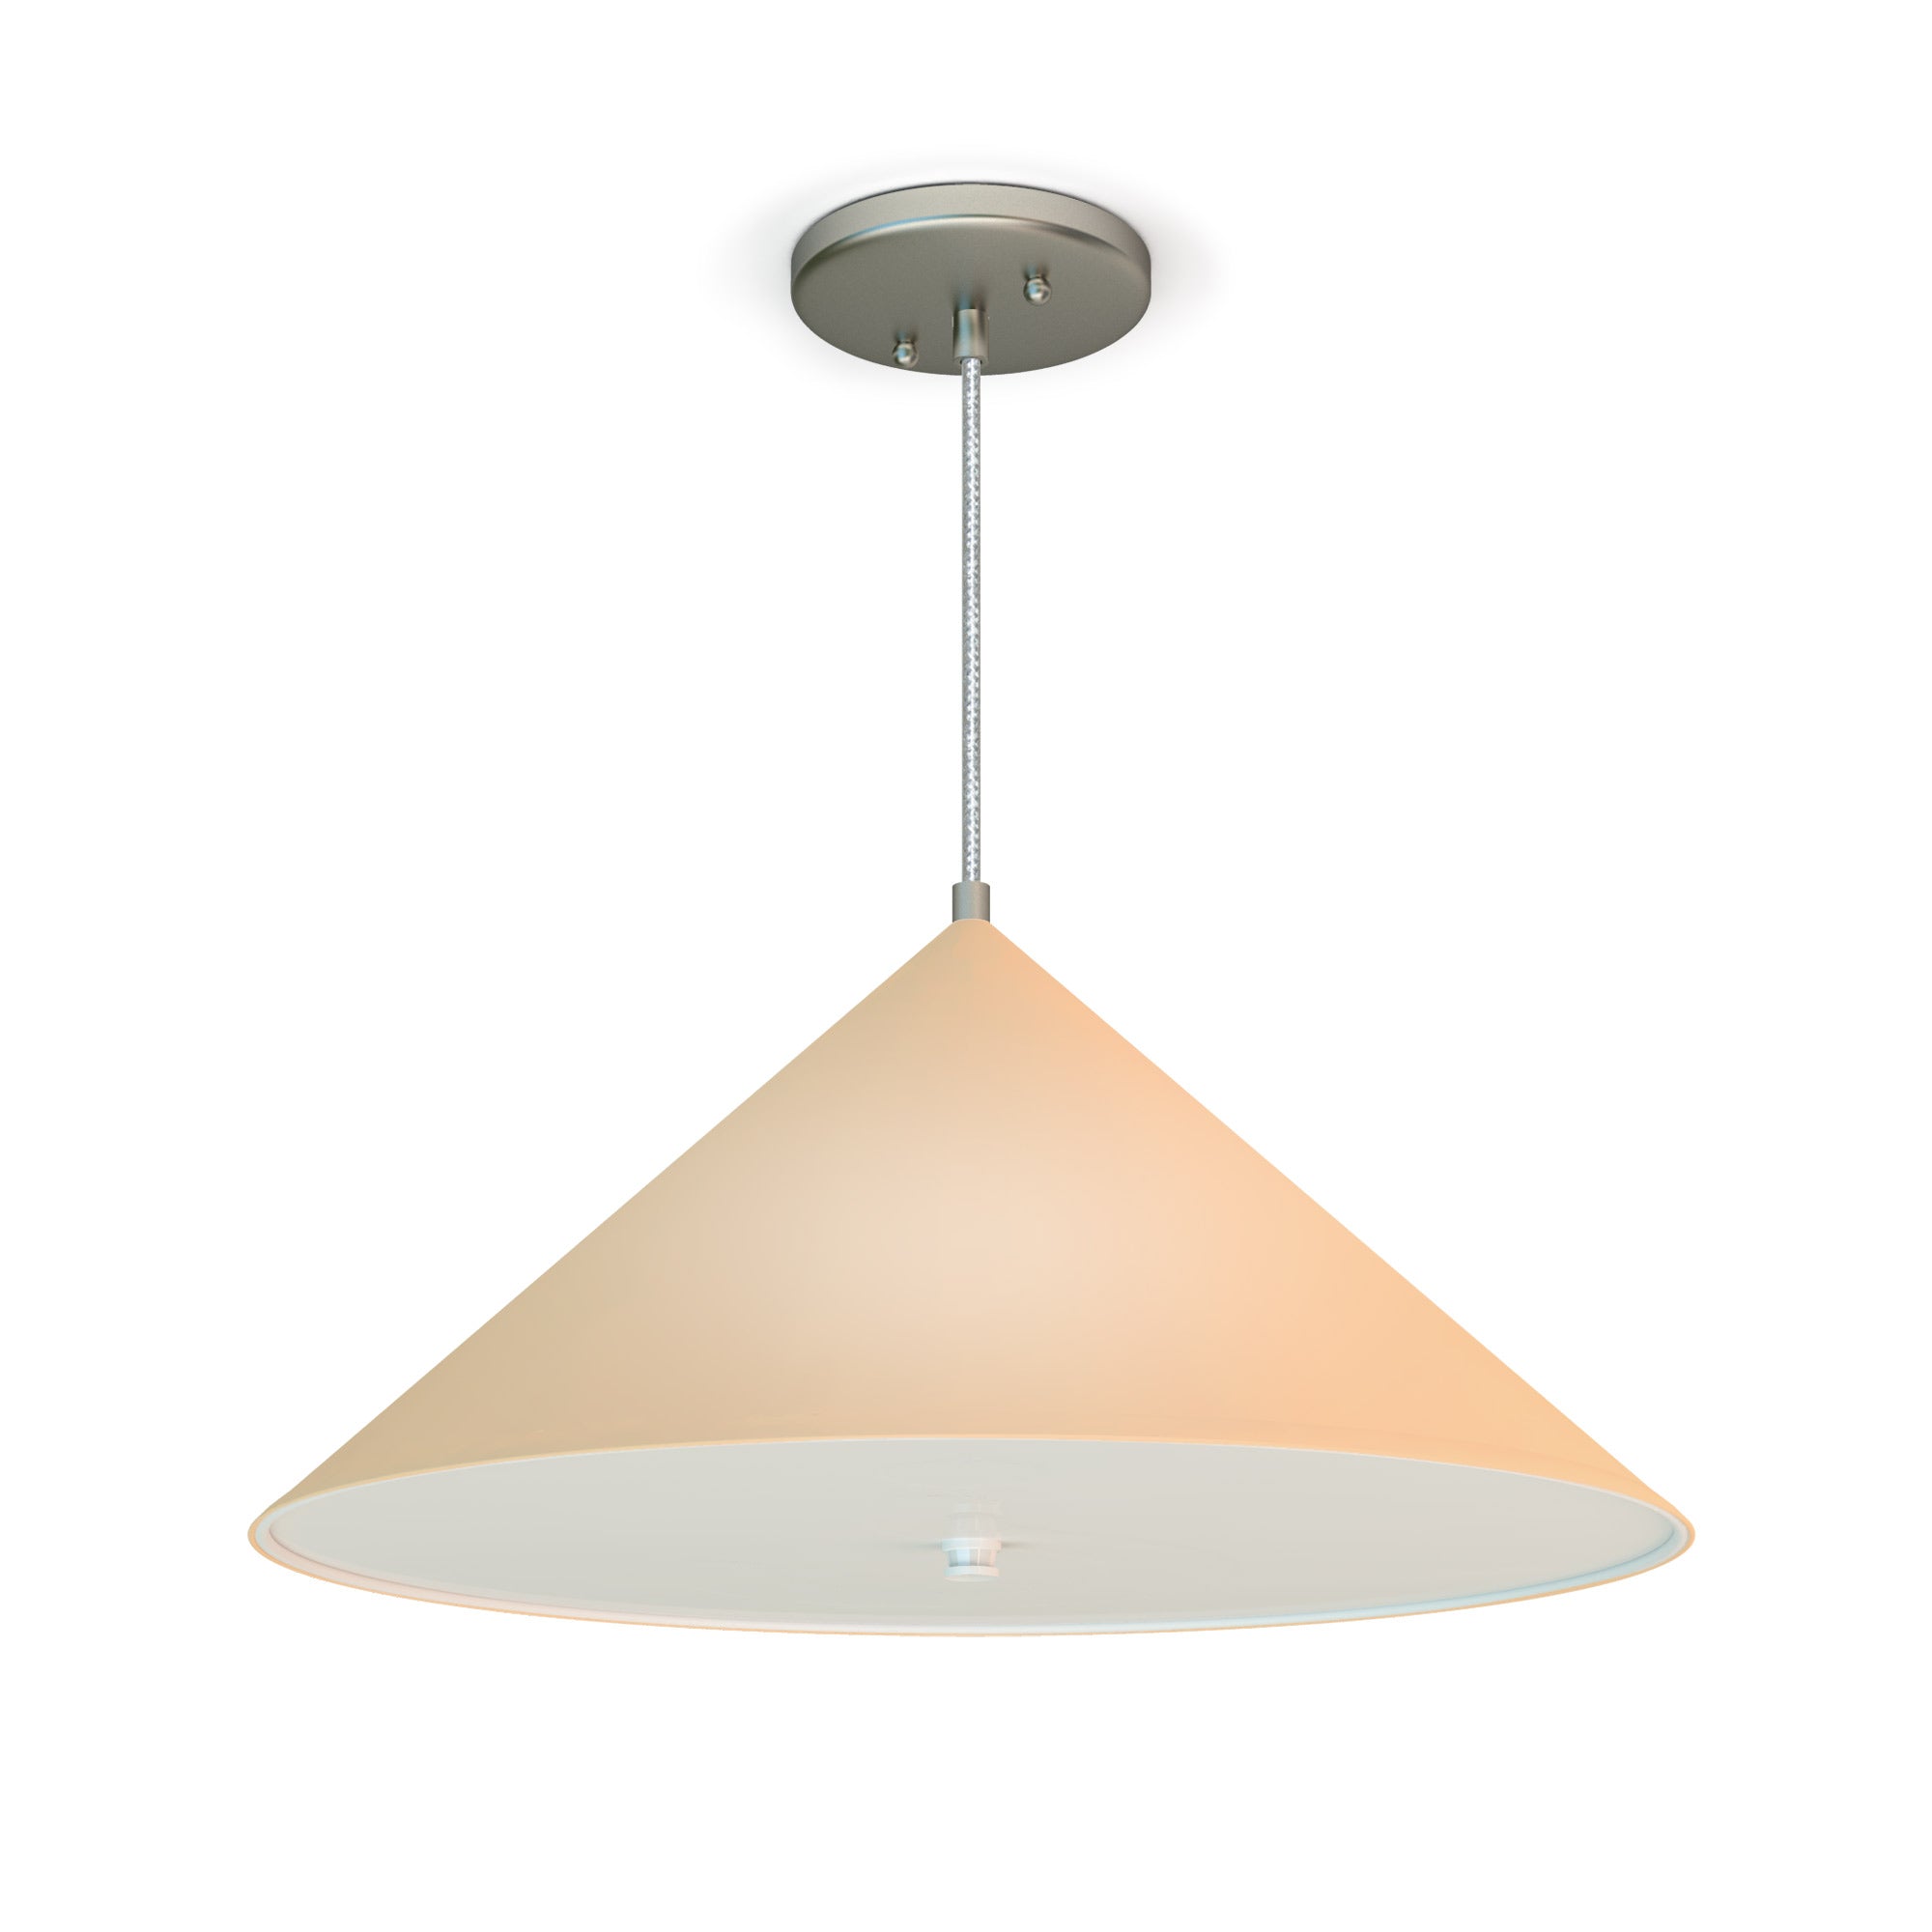 The Angelica hanging ceiling light is the perfect addition to any space within your home or hospitality project. Available in a variety of sizes with hand-tailored textured fabric or a photo veneer shade, this light brings texture and beauty to bars, kitchen islands, hallways, foyers, and bedrooms.